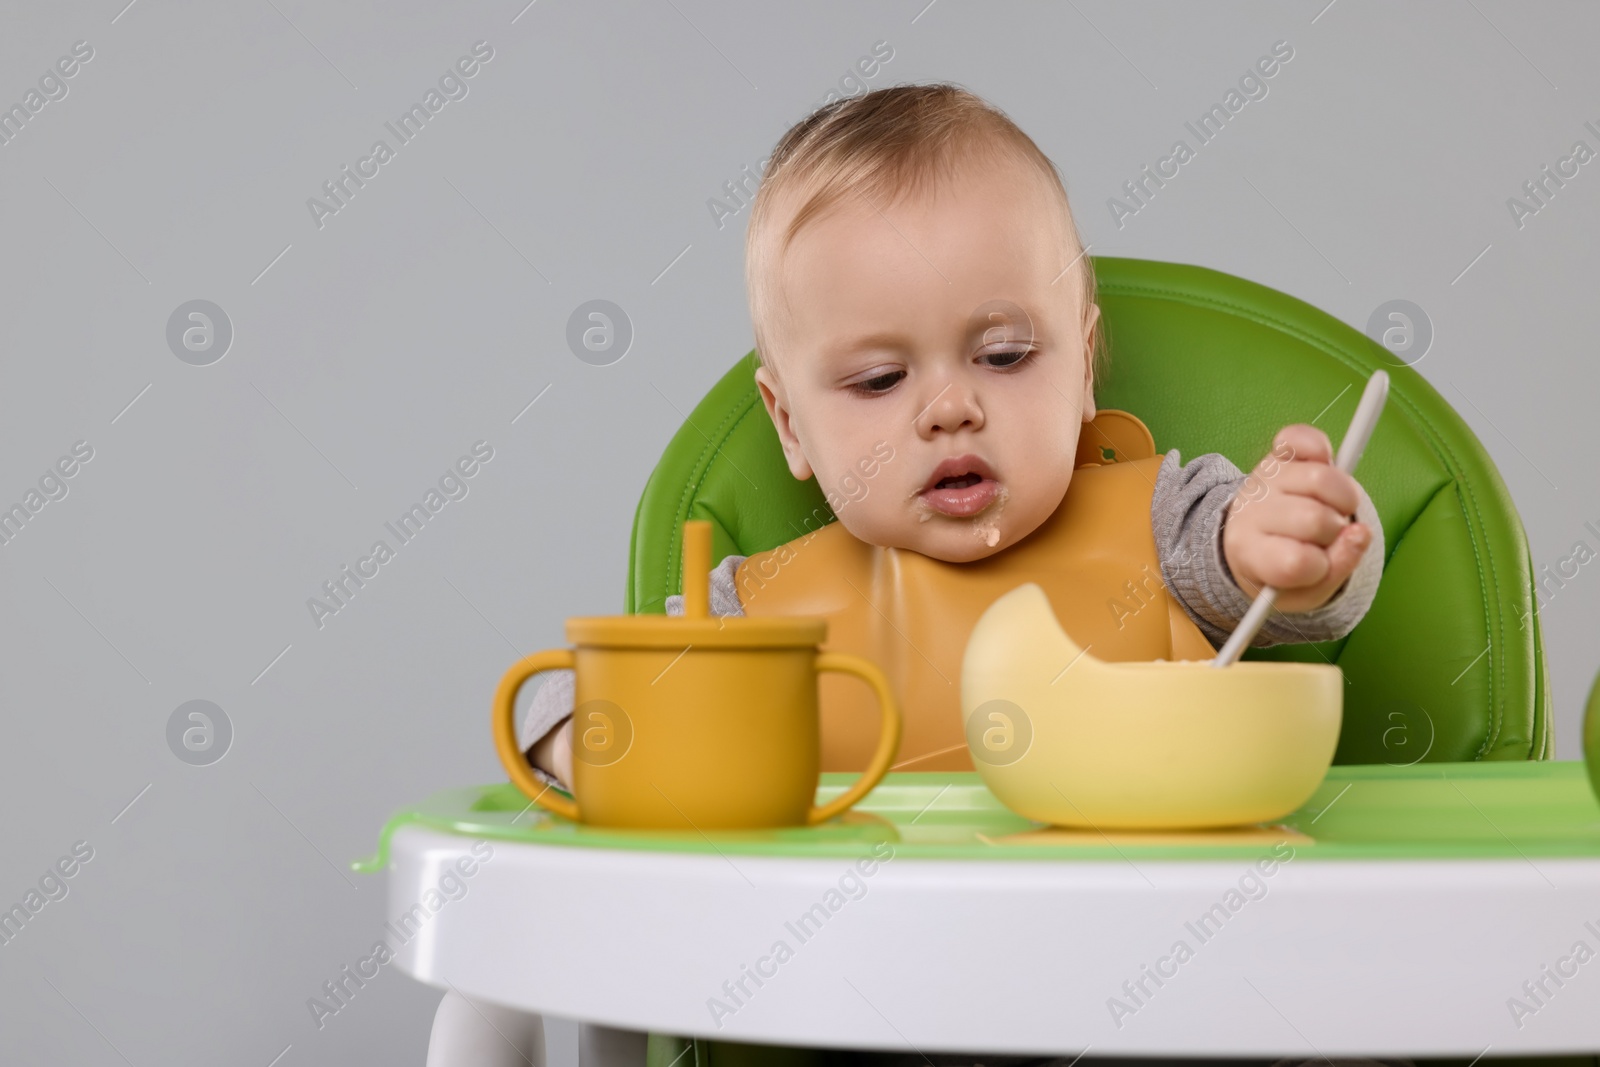 Photo of Cute little baby eating healthy food in high chair on gray background, space for text